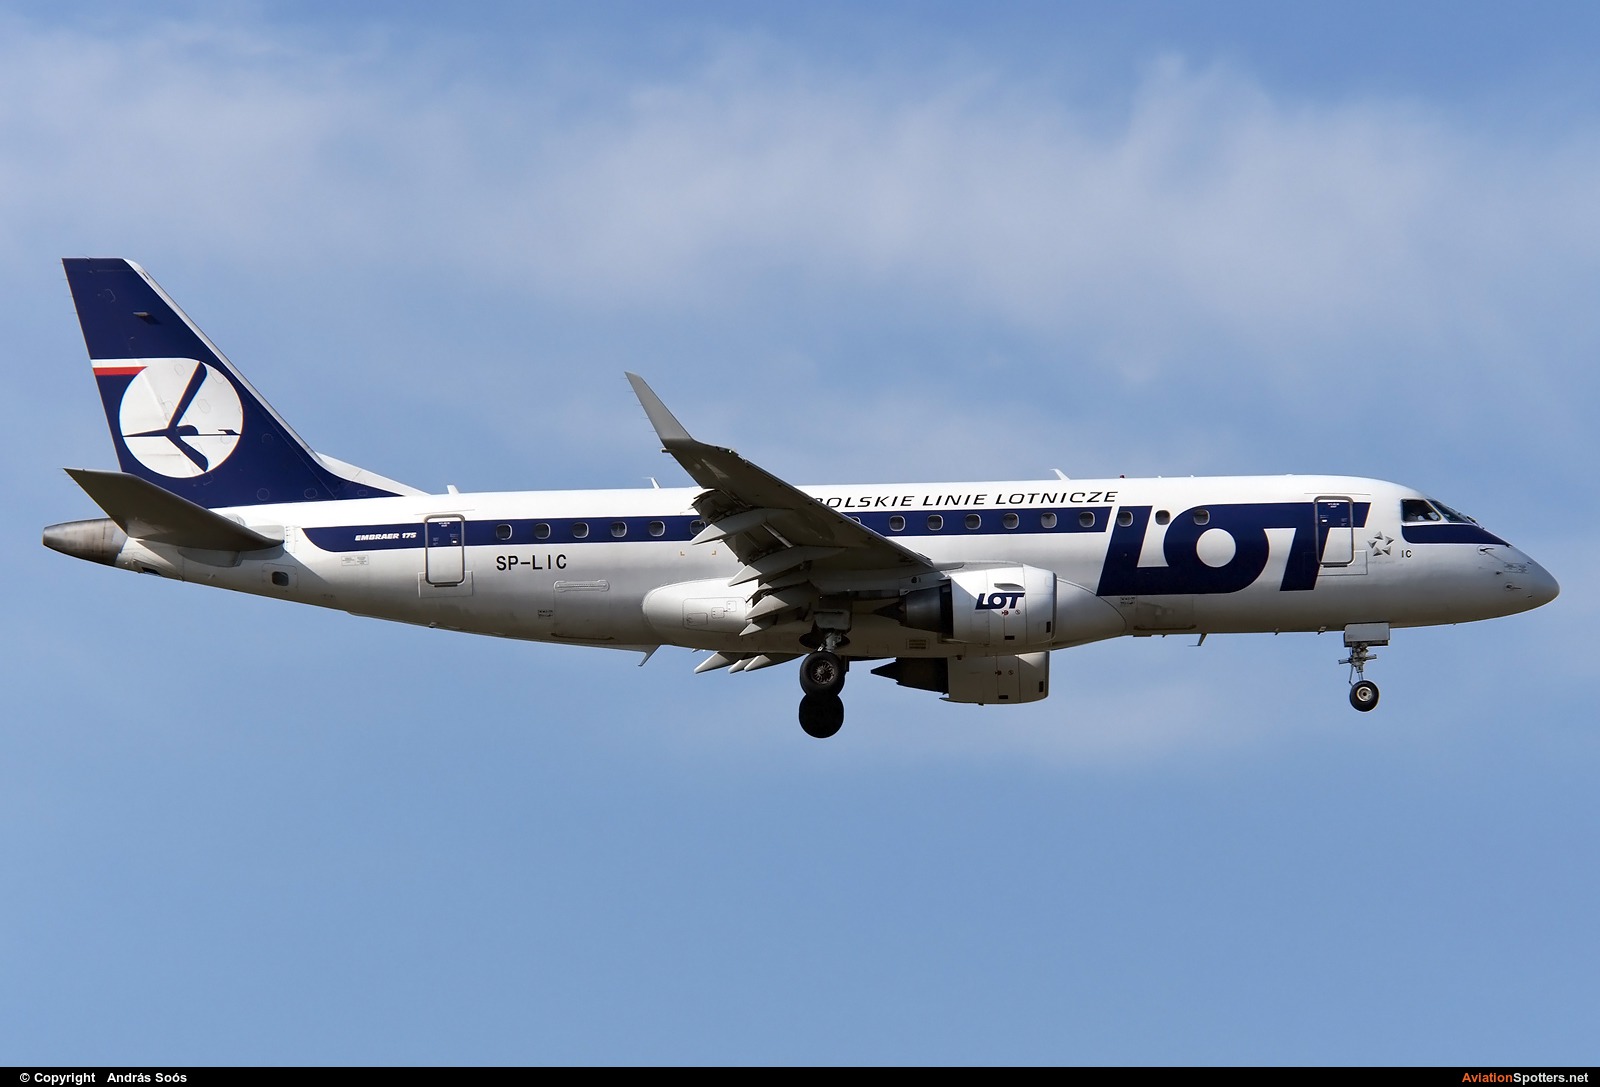 LOT - Polish Airlines  -  175  (SP-LIC) By András Soós (sas1965)